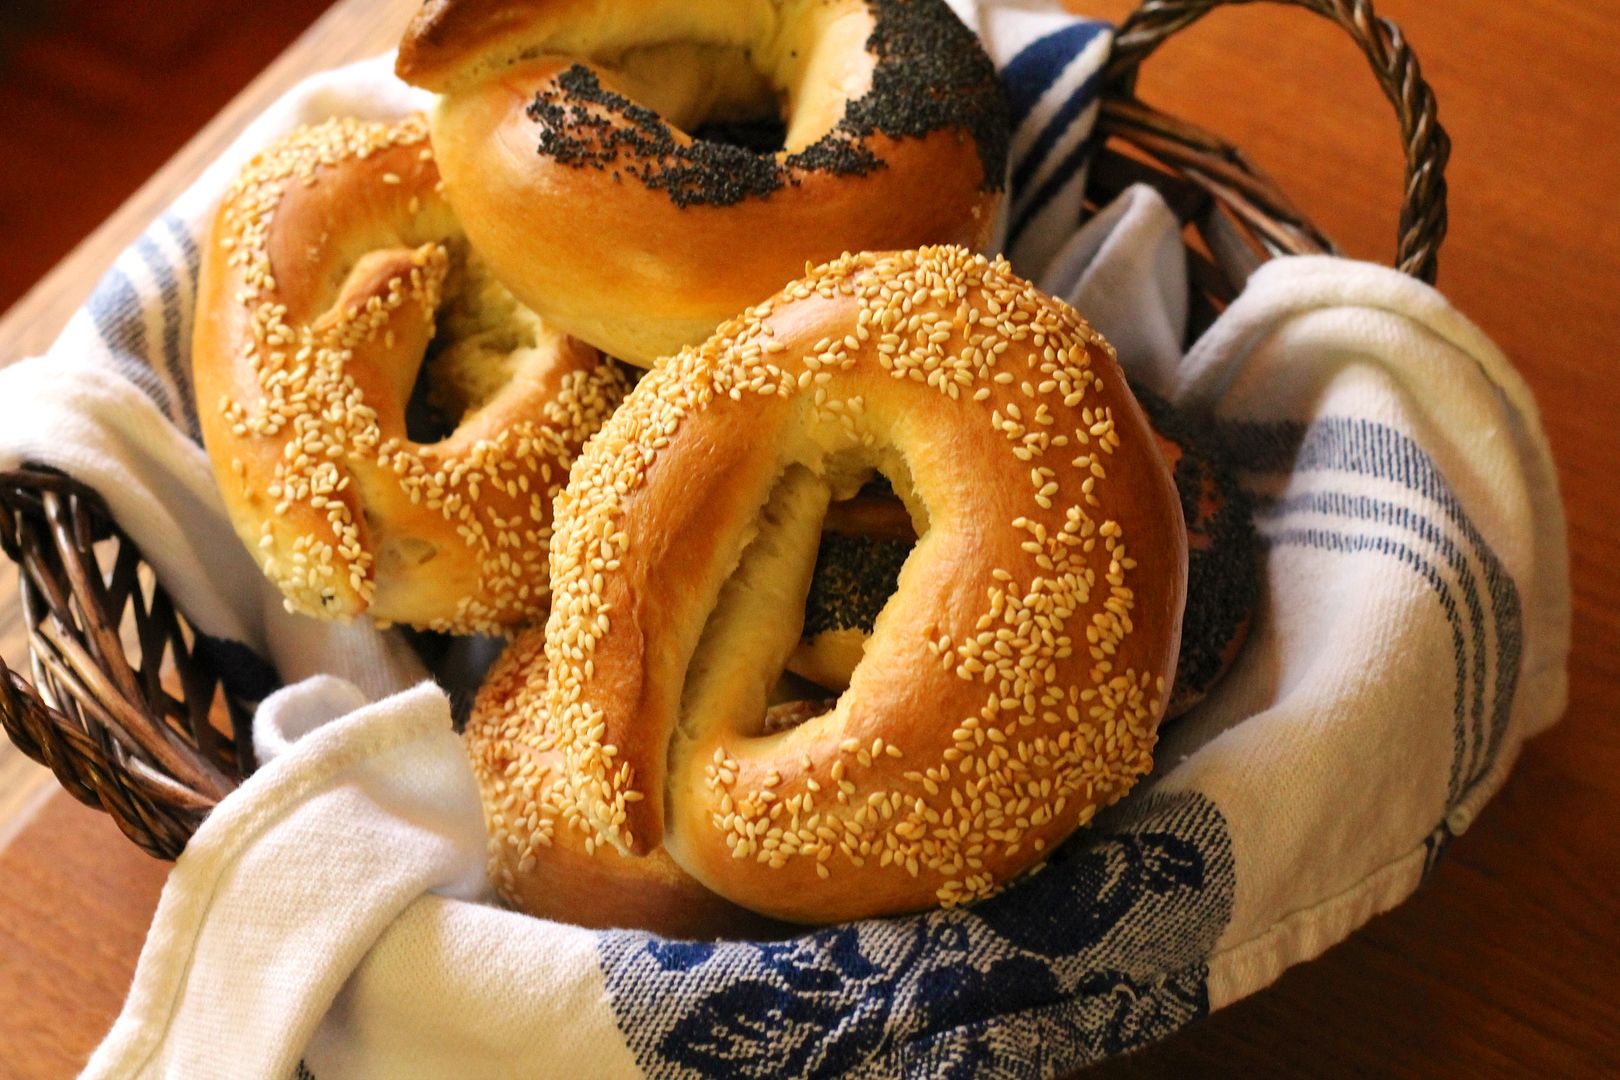 Montreal style bagels in a basket